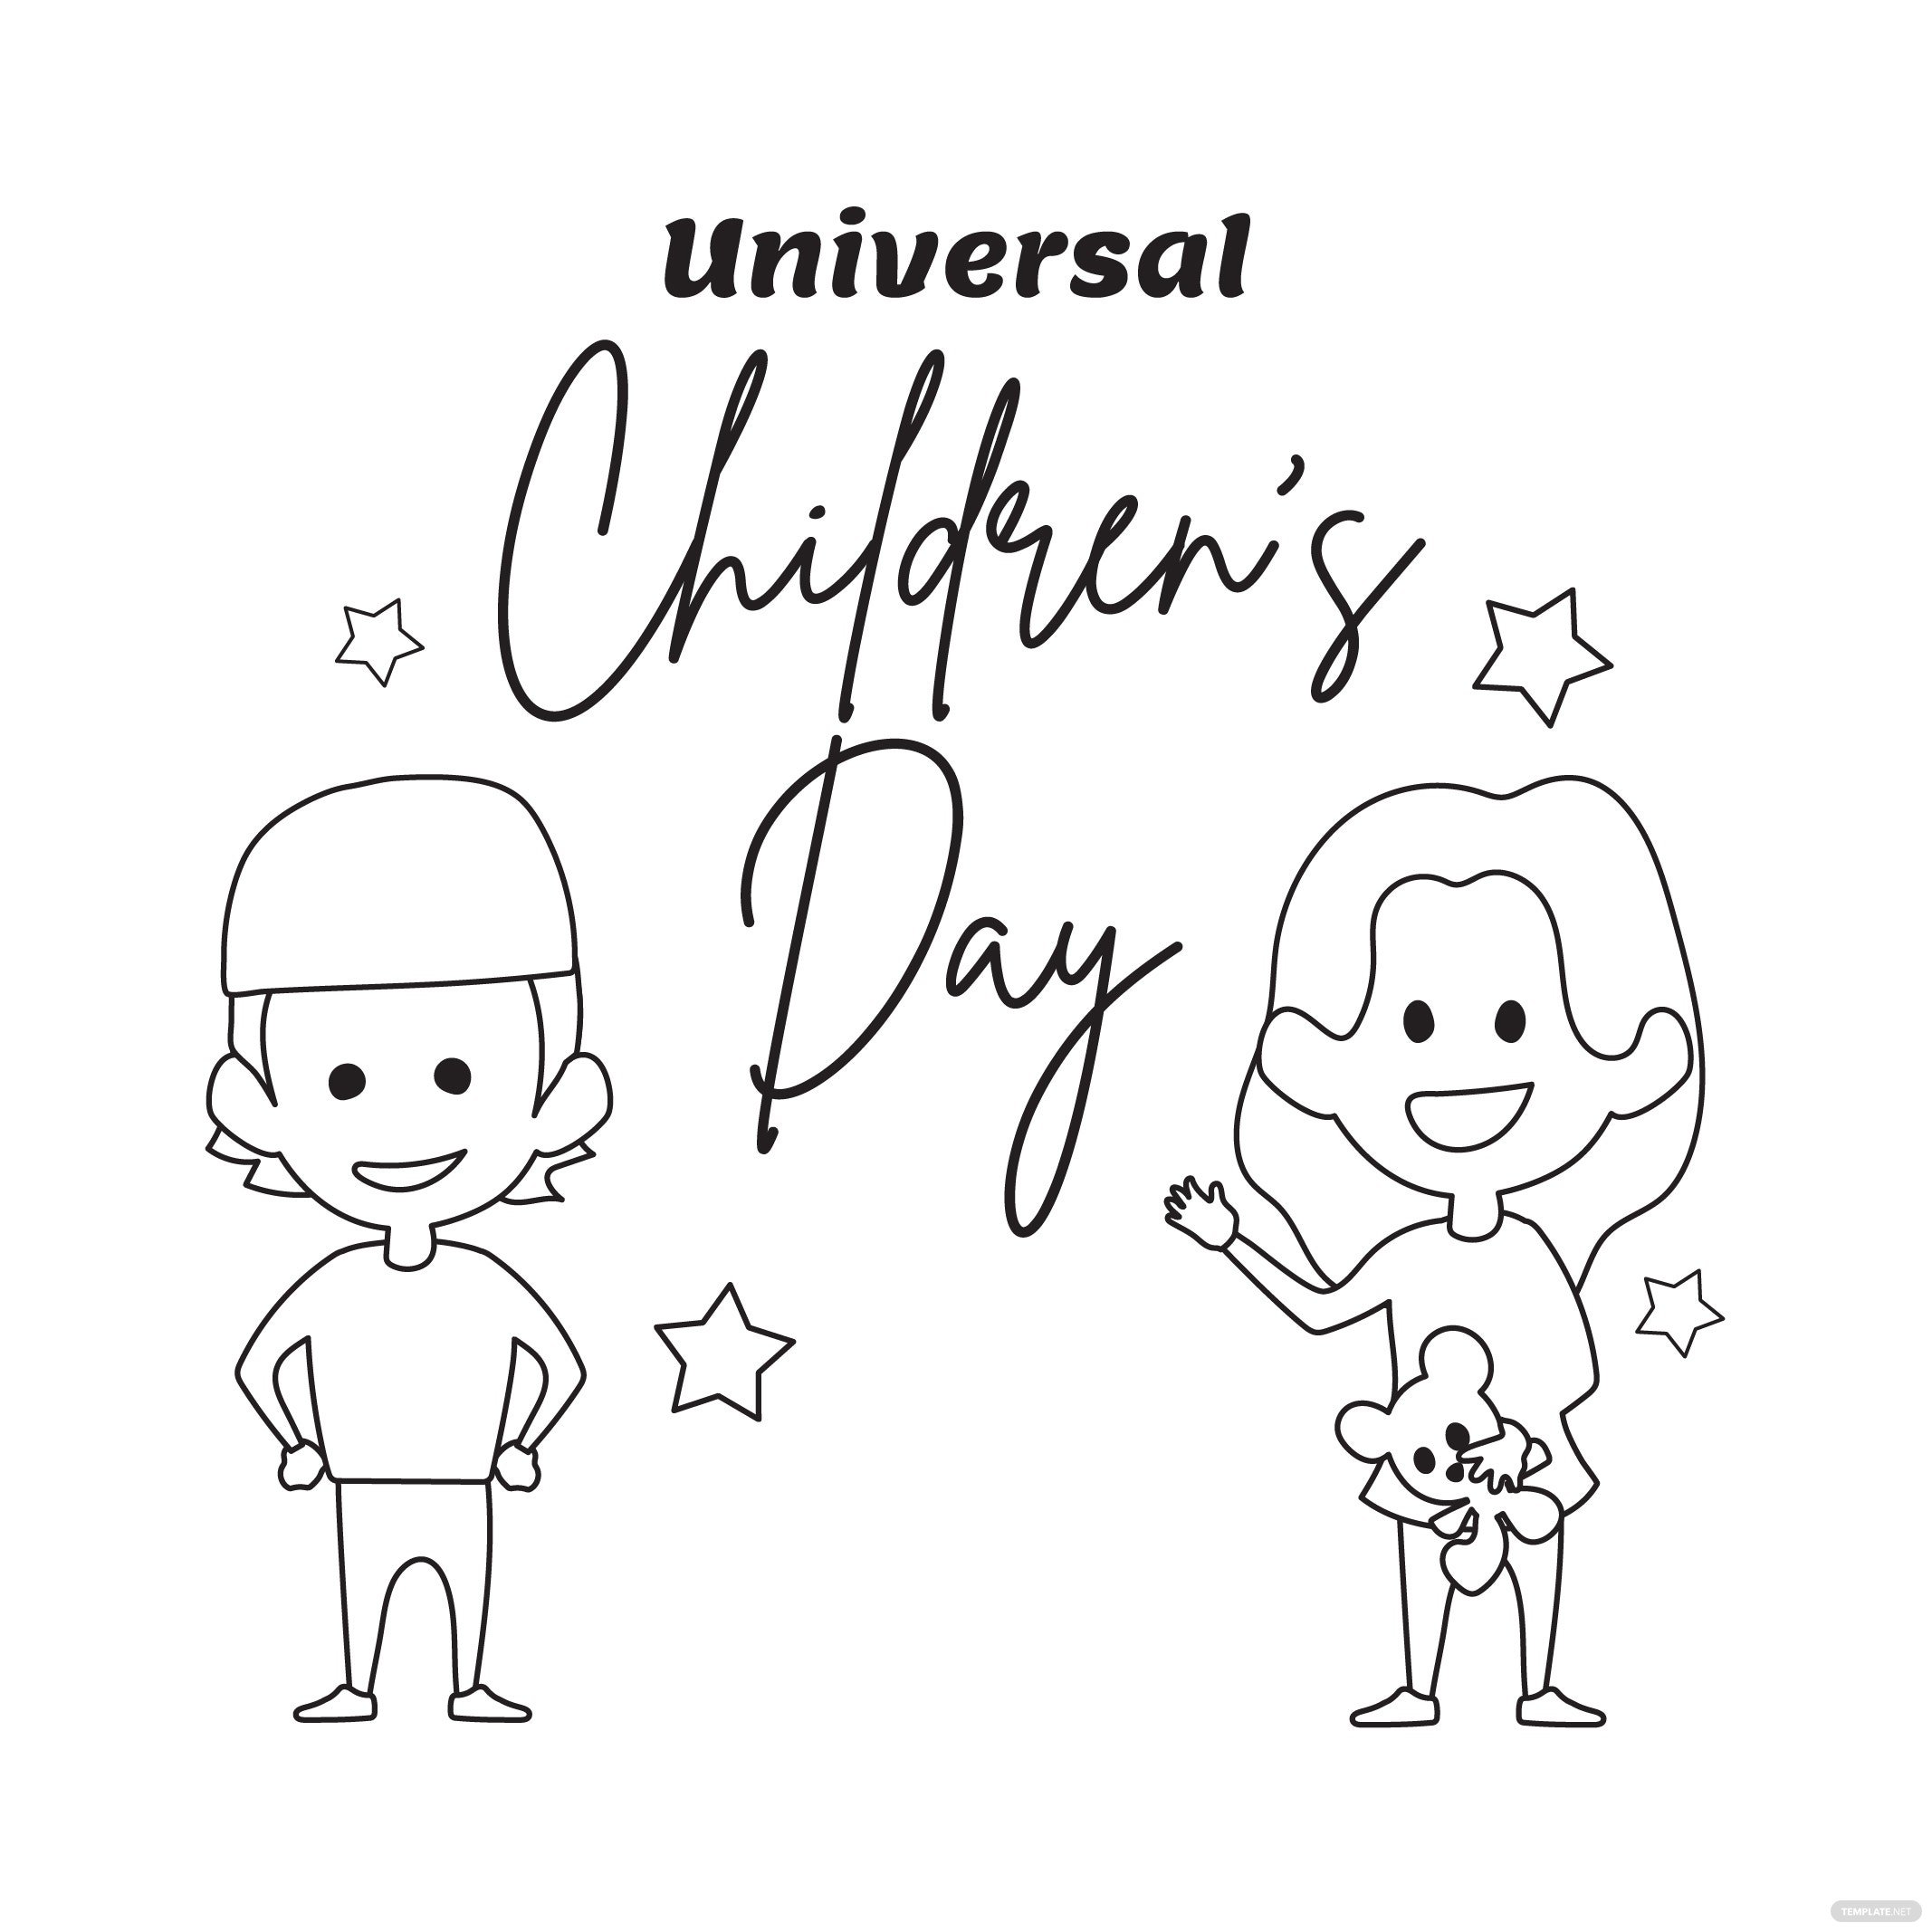 The Universal Children's Day – ISSD